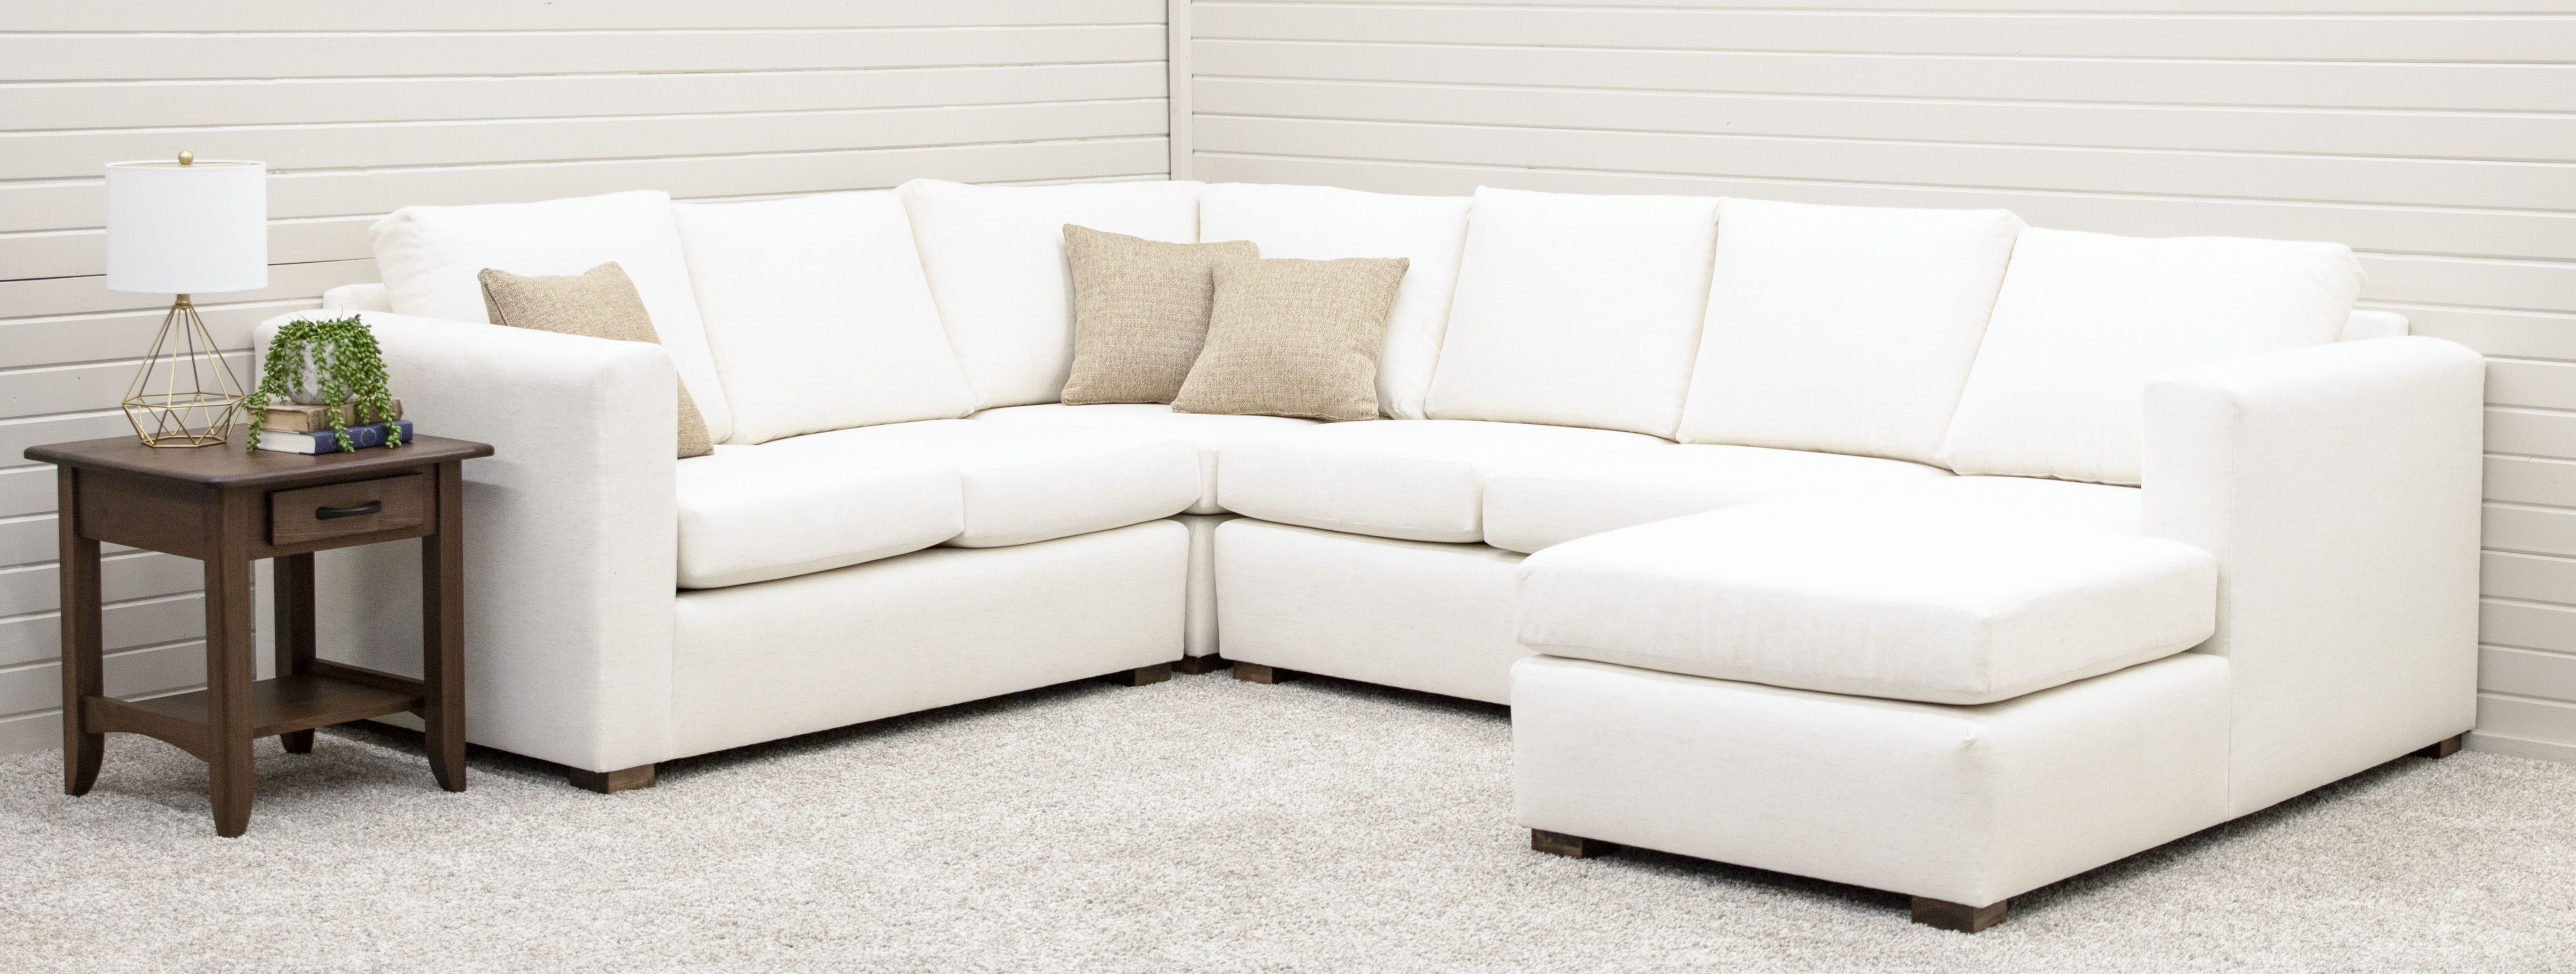 Ordering a Custom Sectional Sofa: A Quick Overview